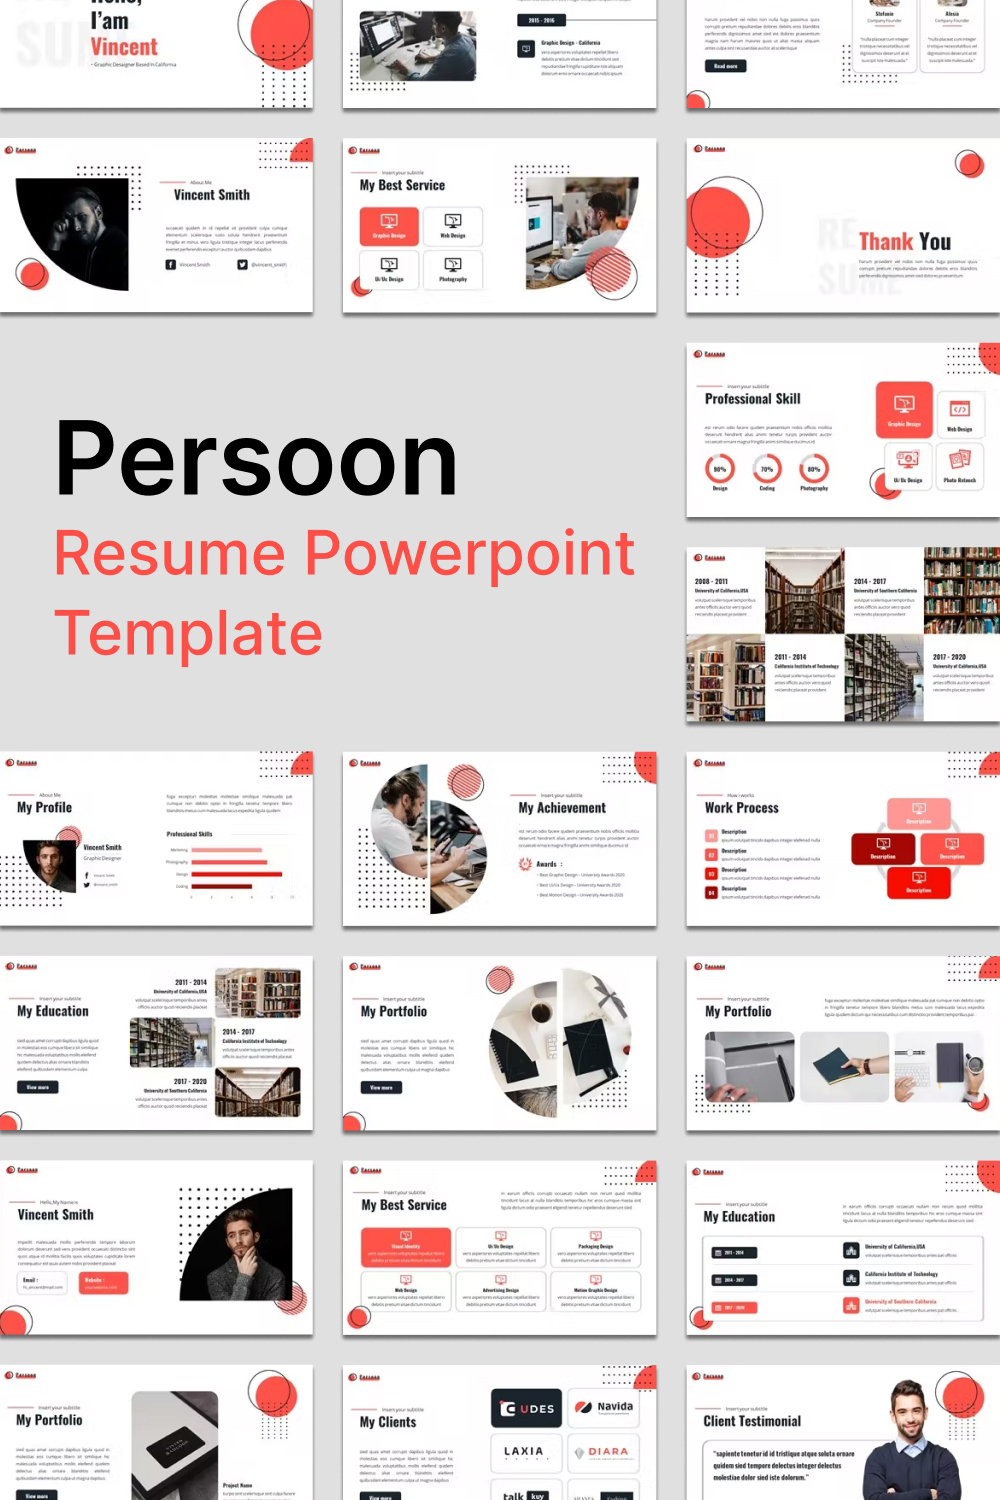 Persoon resume powerpoint template of pinterest.